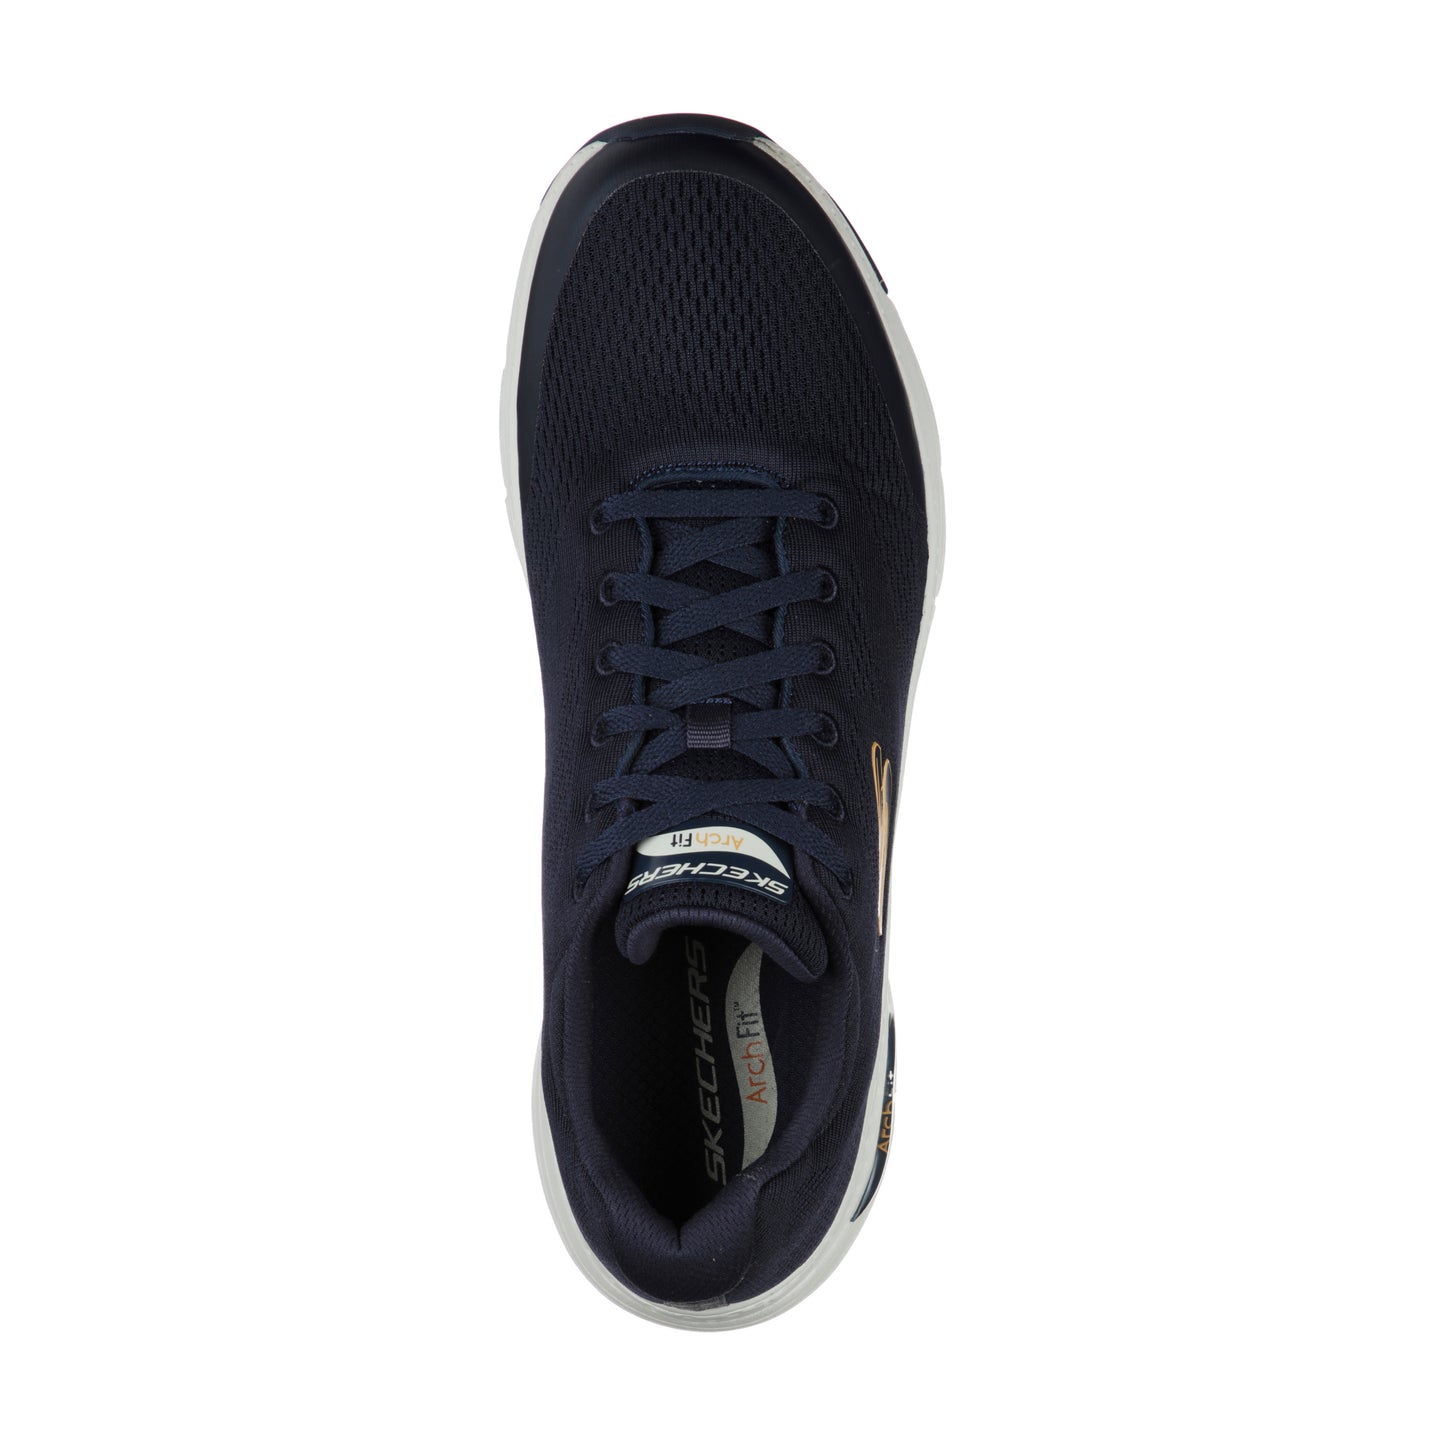 Skechers 232040 Arch Fit Navy Trainers